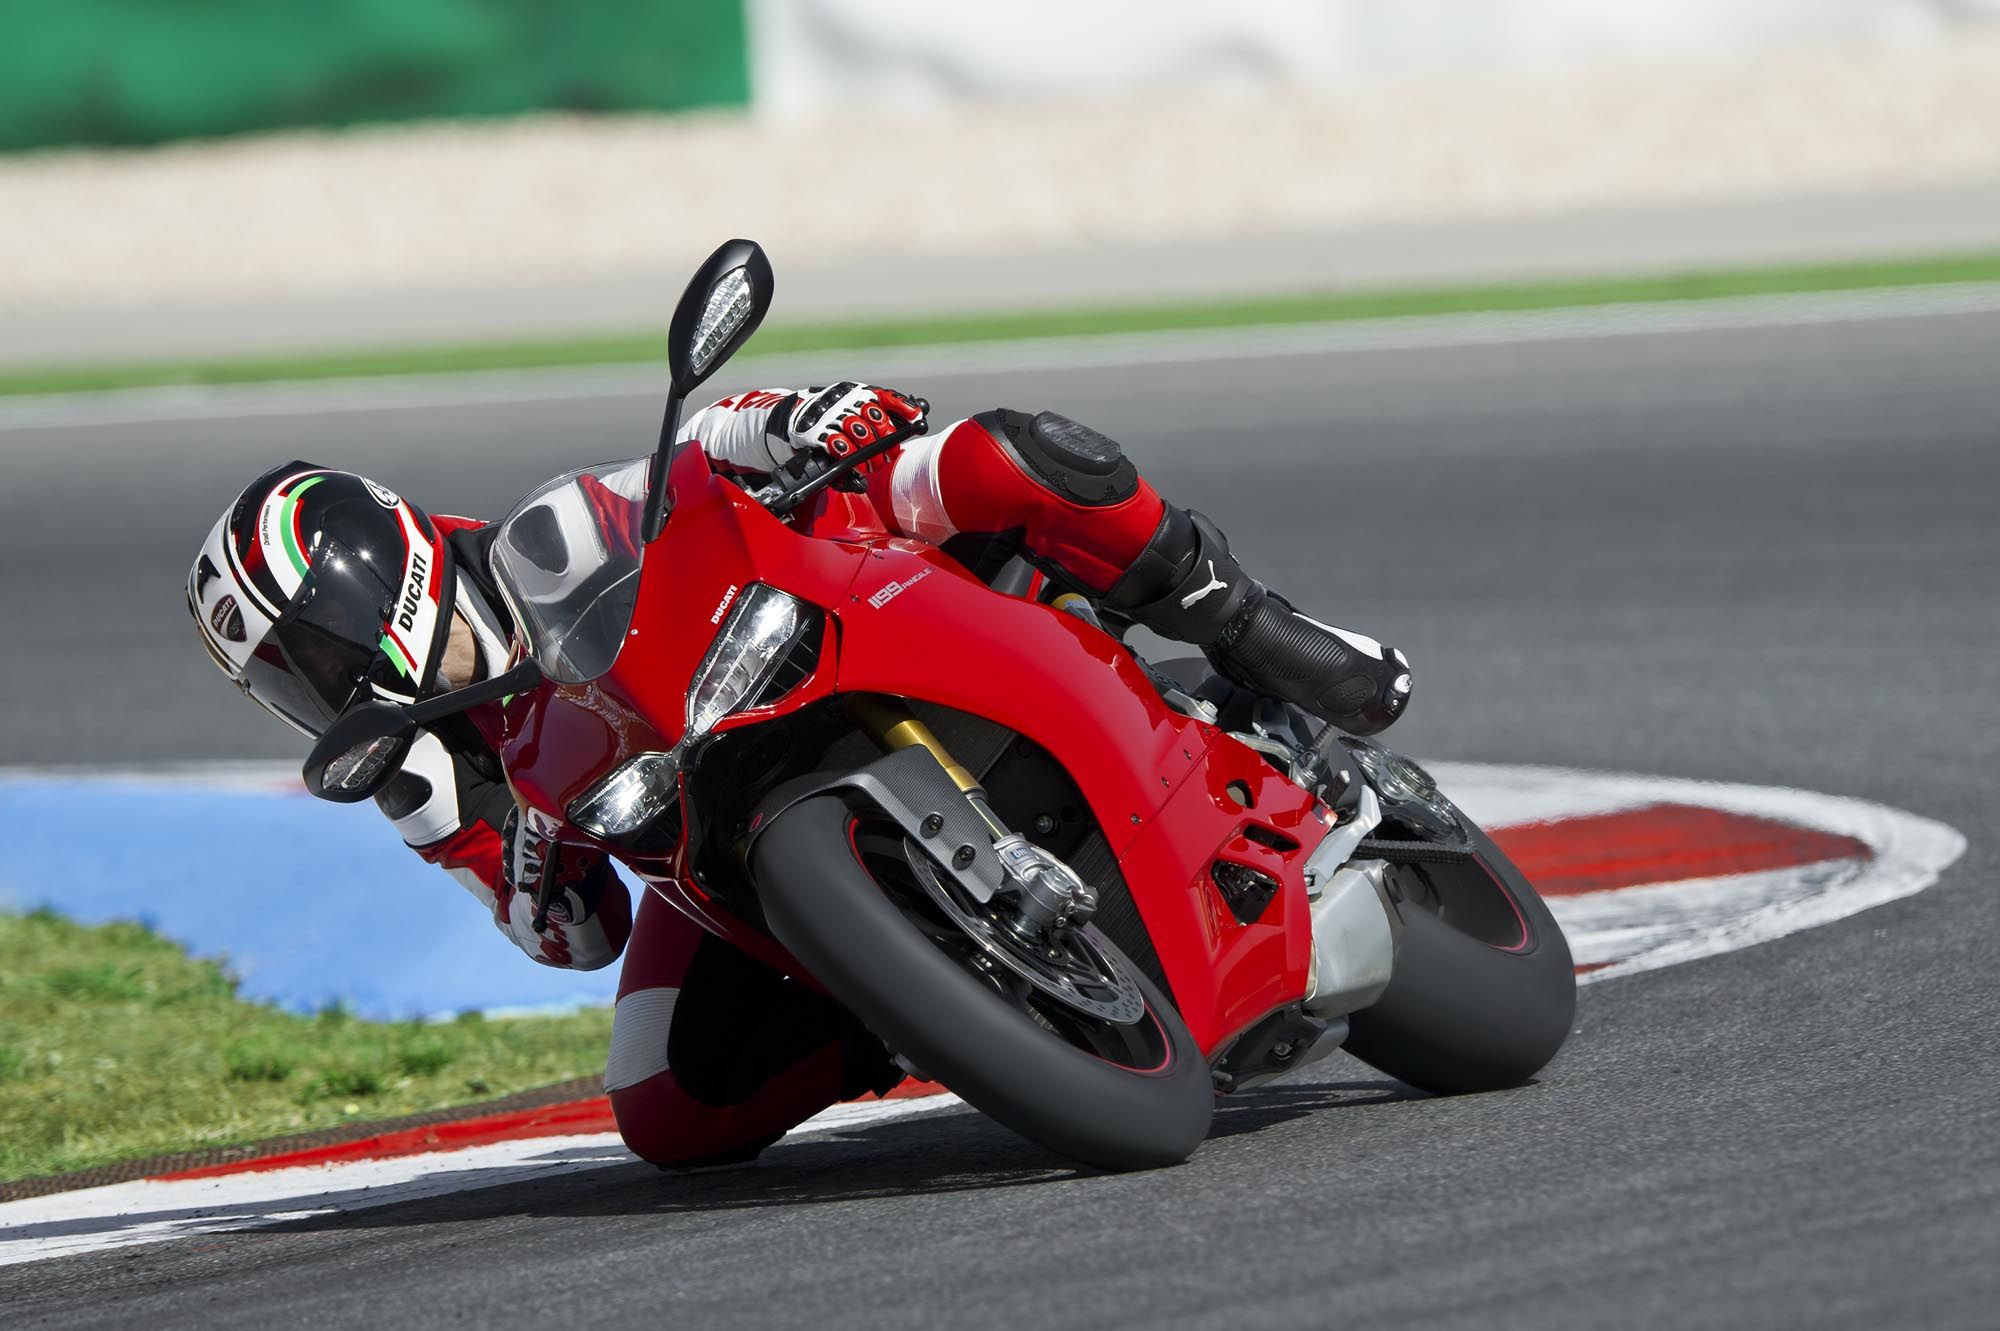 Ducati 1199 Panigale recalled! Here are the details | Motoroids